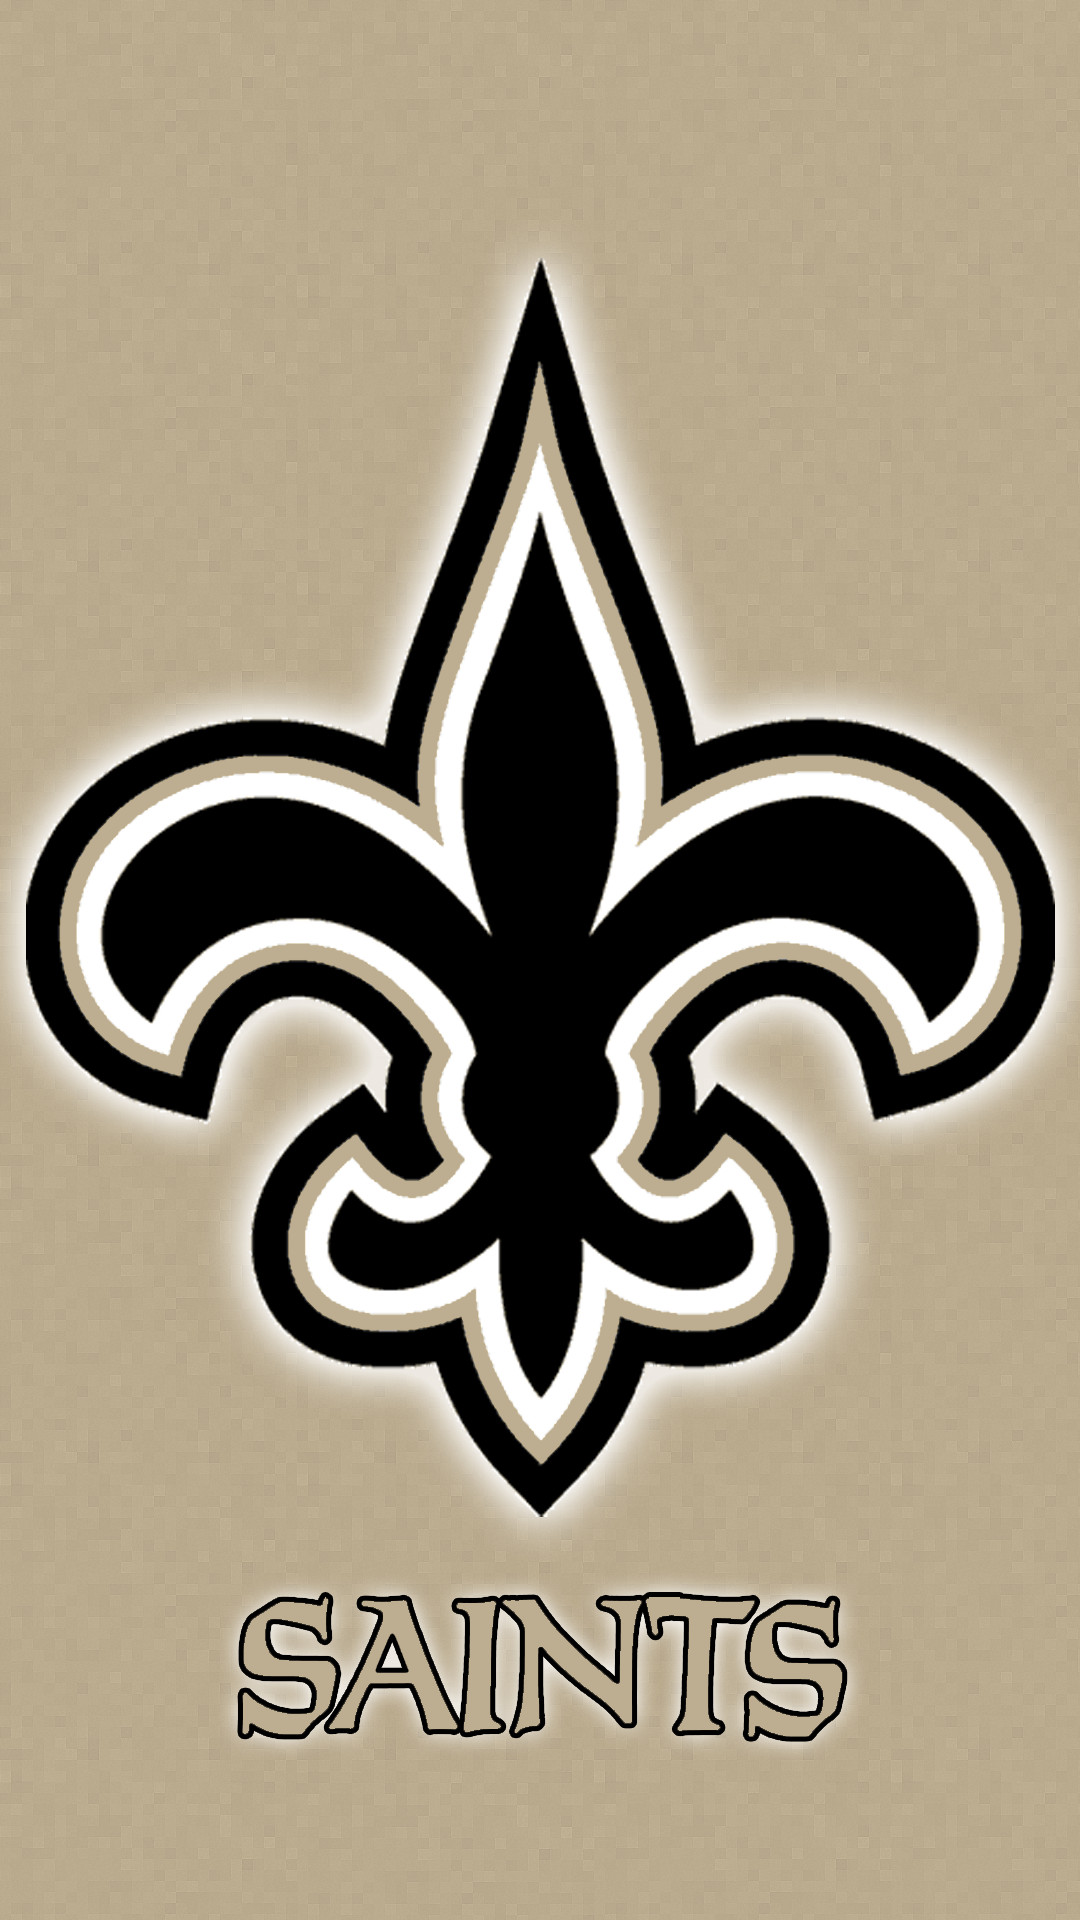 1080x1920 Saints pixelated Galaxy S5 lock screen wallpaper I made to go with the home  screen.